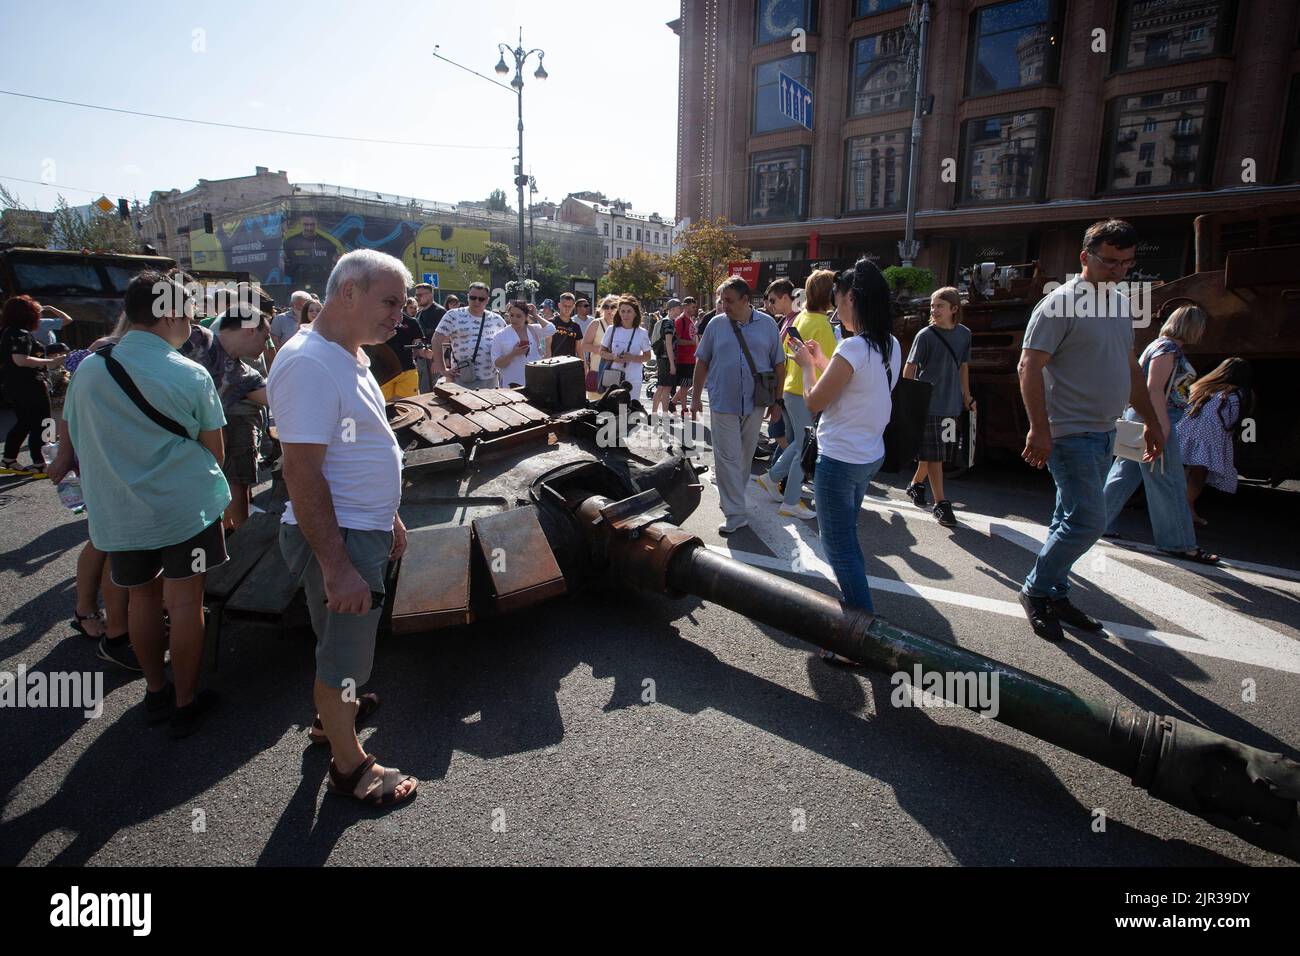 People look at the cannon of a destroyed Russian tank displayed on the main street Khreshchatyk as part of the upcoming celebration of the Independence Day of Ukraine amid Russia's invasion of Ukraine in central Kyiv. Stock Photo